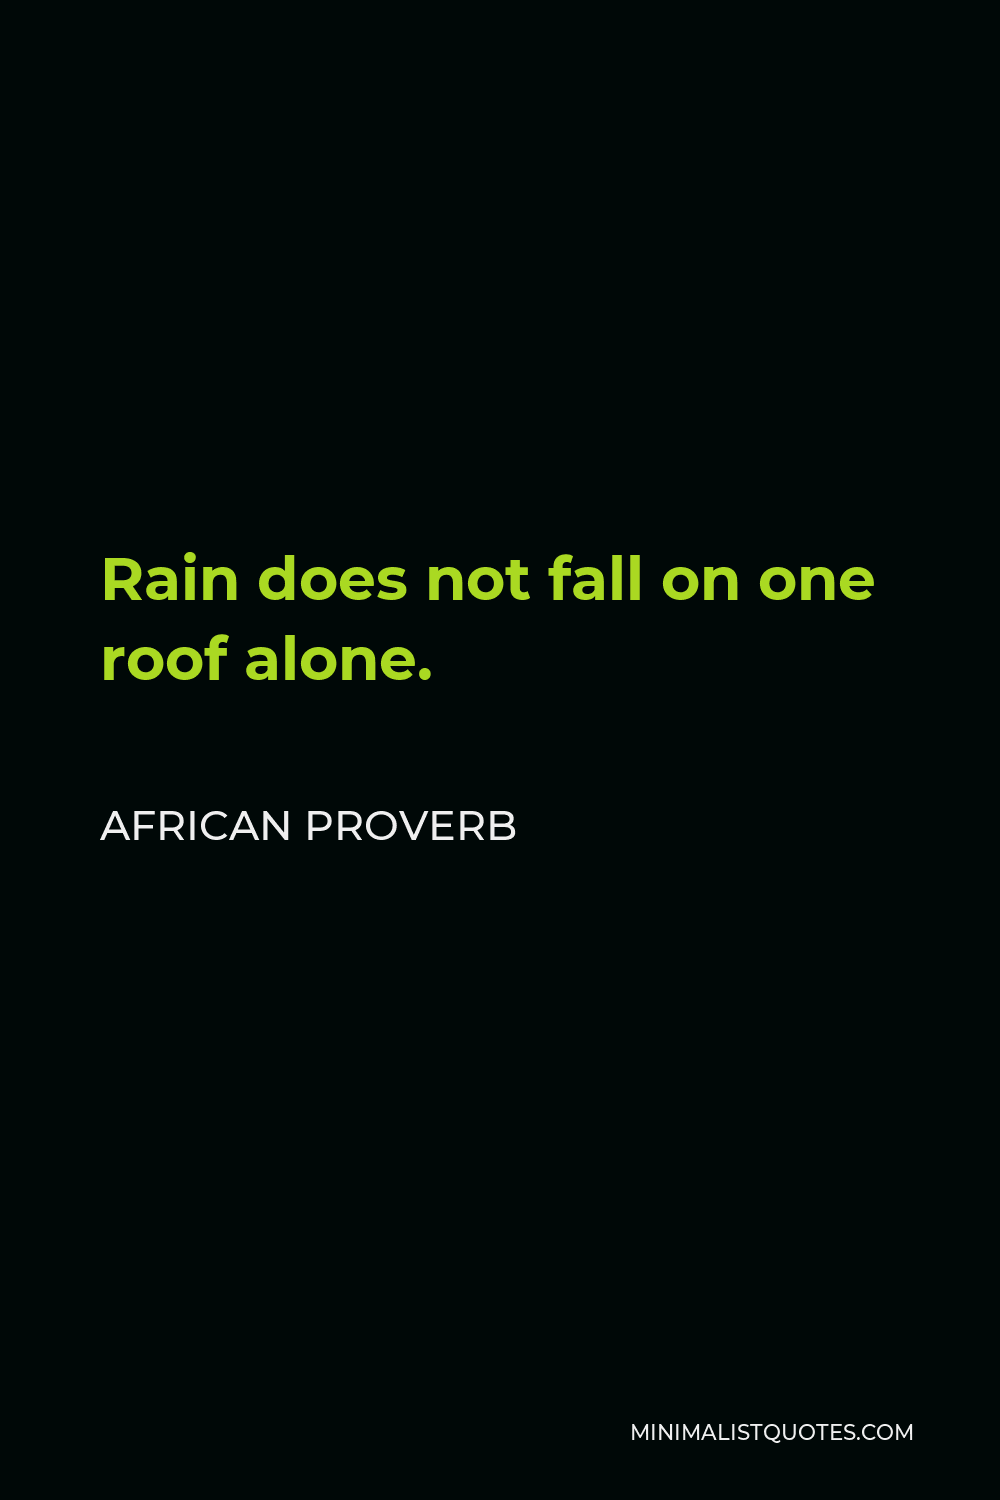 African Proverb Quote - Rain does not fall on one roof alone.